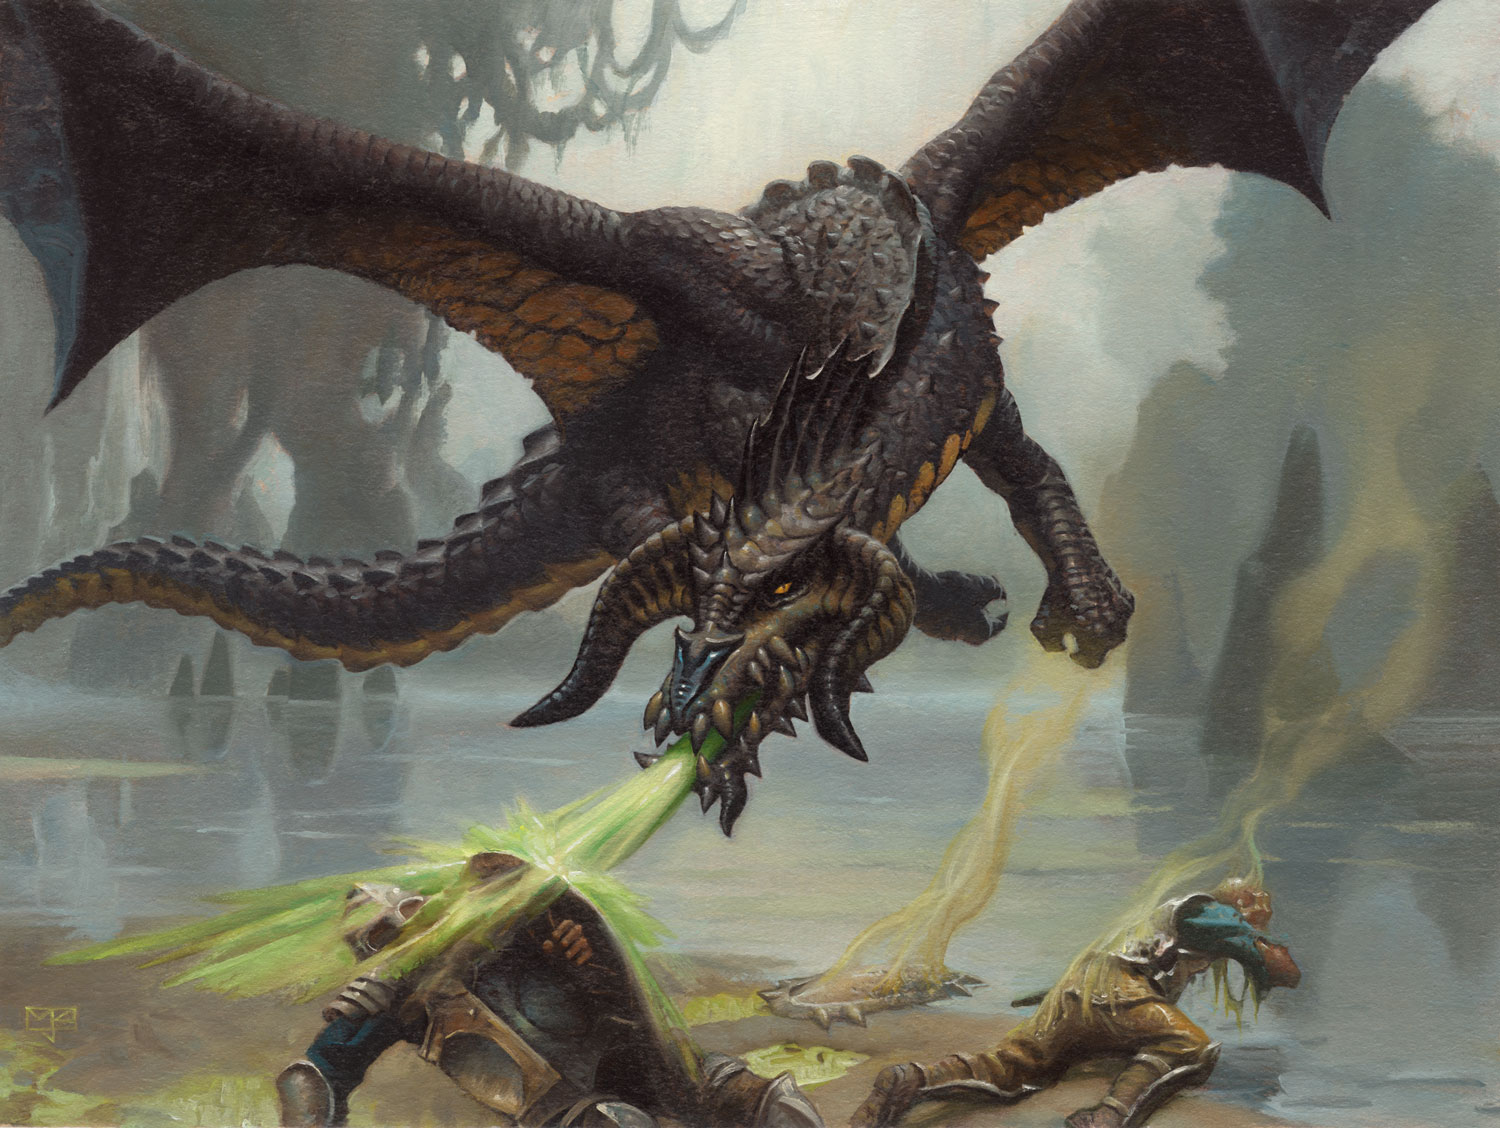 black-dragon-mtg-art-from-adventures-in-the-forgotten-realms-set-by